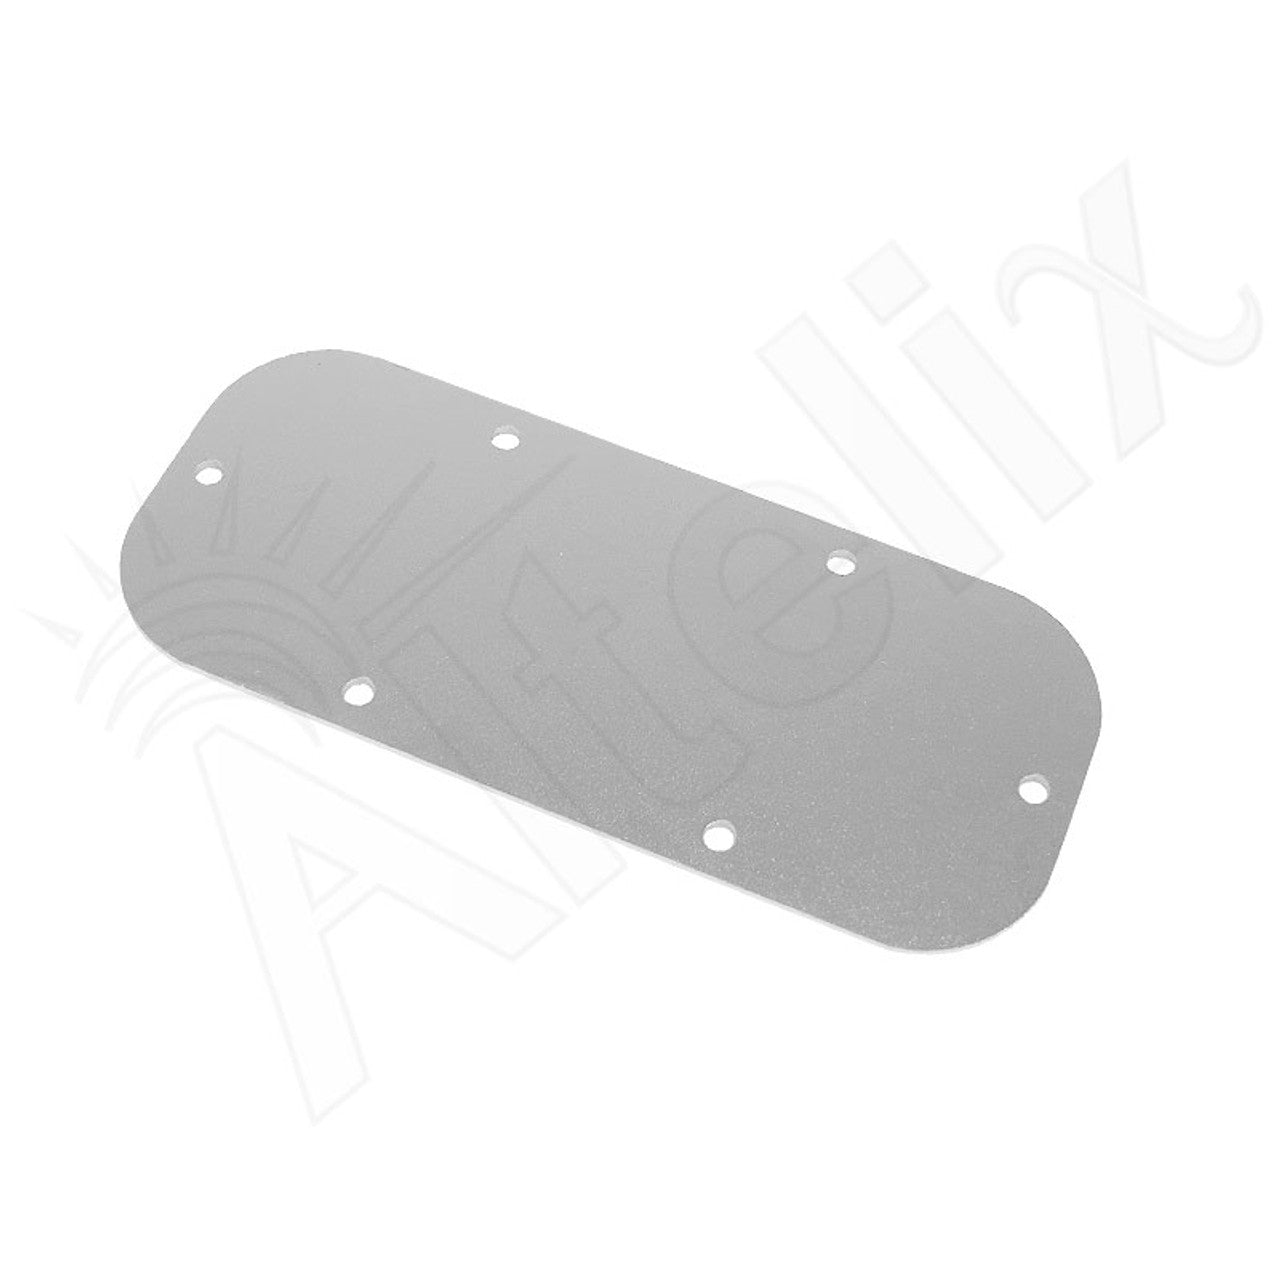 Blank Aluminum Access Panel for NS121006 Enclosures